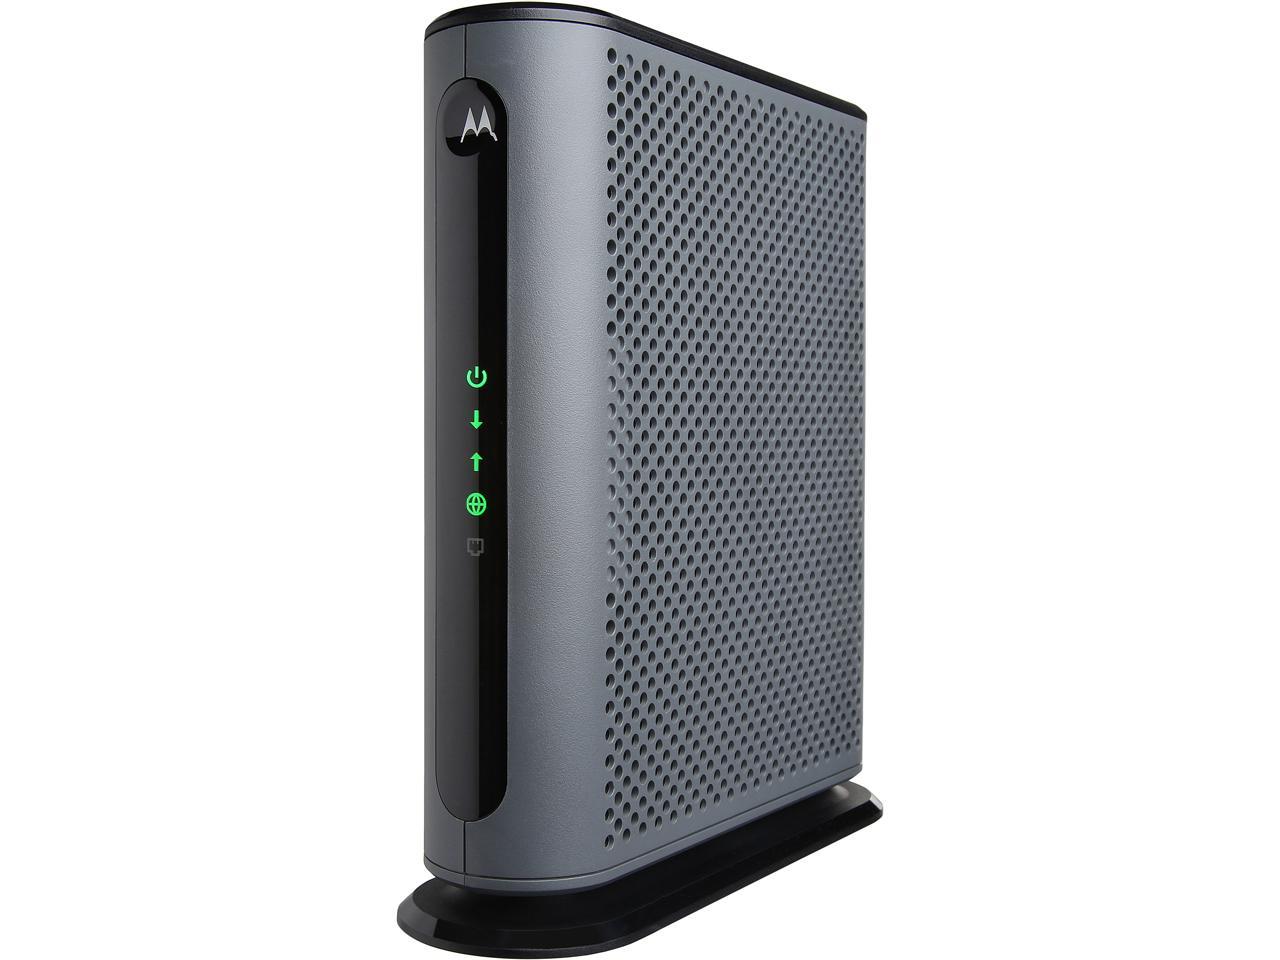 Motorola Ultra Fast Docsis 3 1 Cable Modem Model Mb8600 Plus 32x8 Docsis 3 0 Certified By Comcast Xfinity And Cox Newegg Com